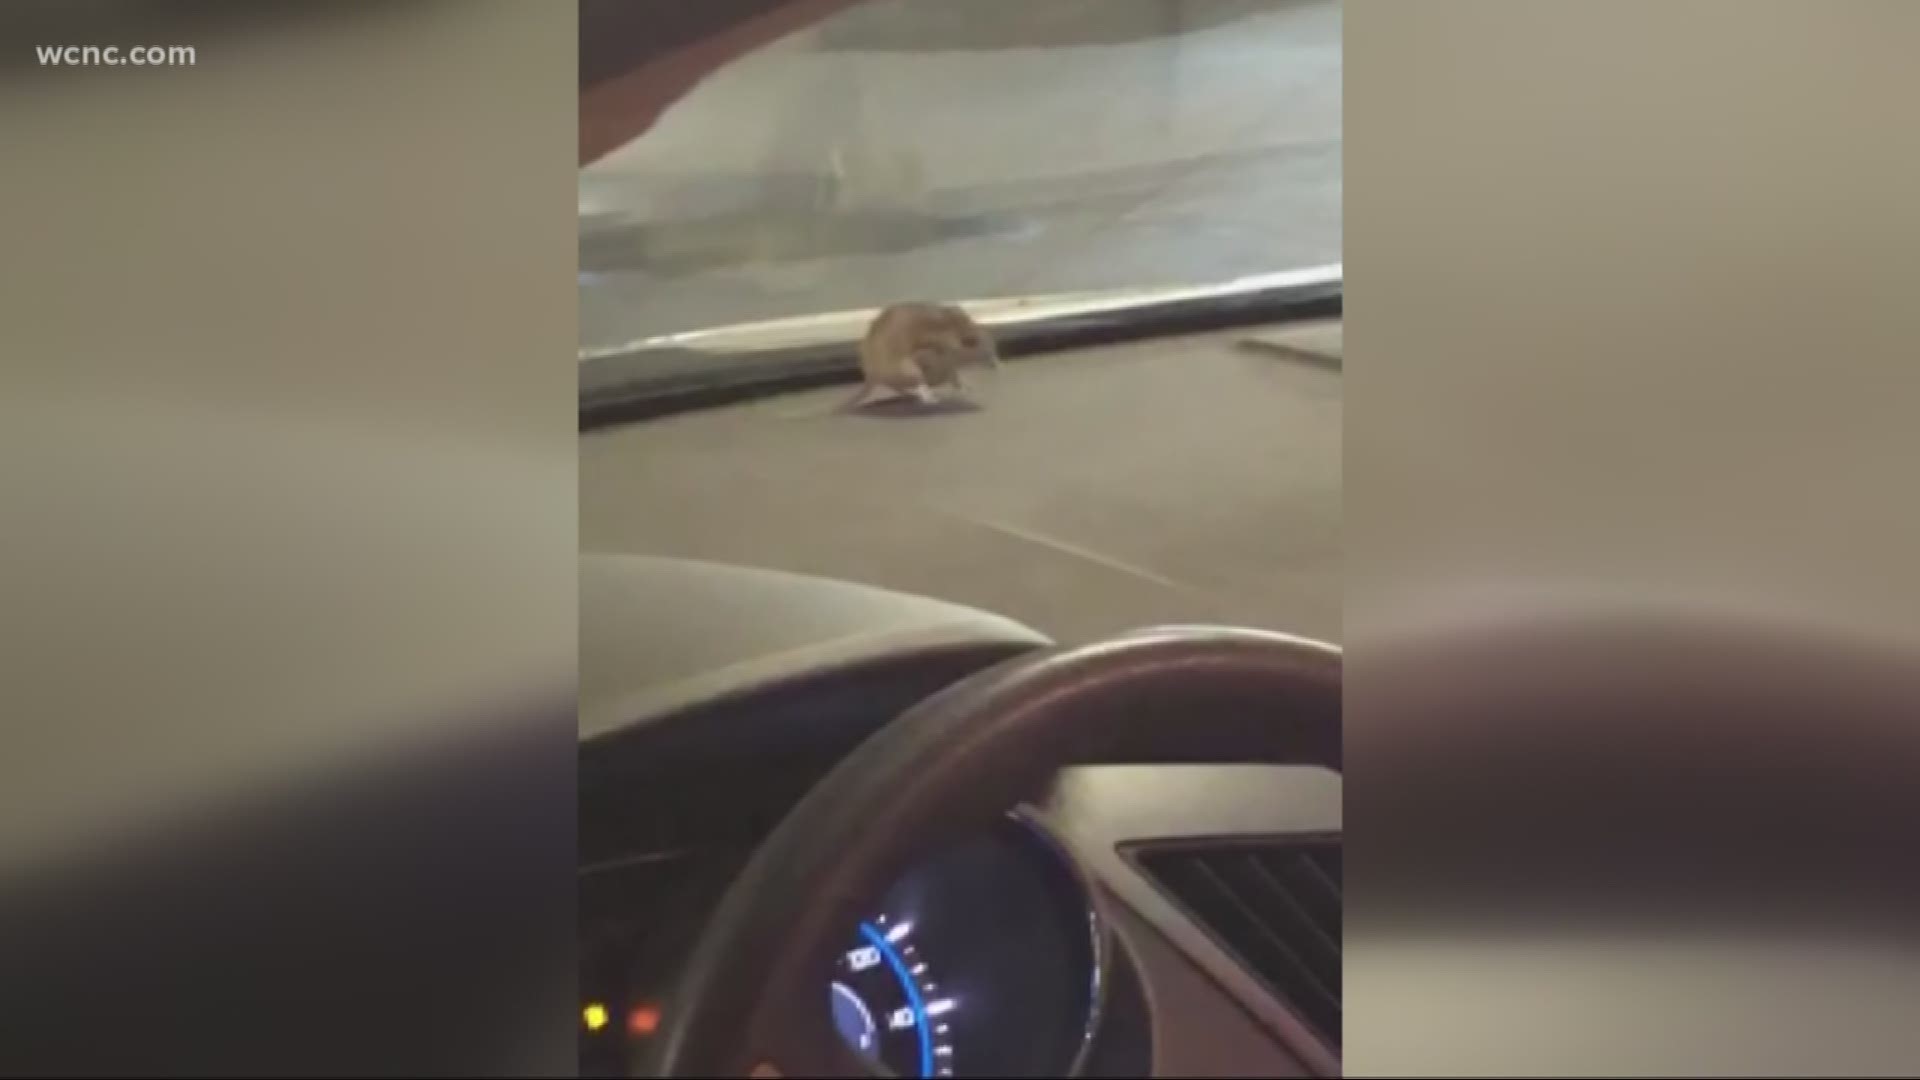 Keeping pests and animals out of your car